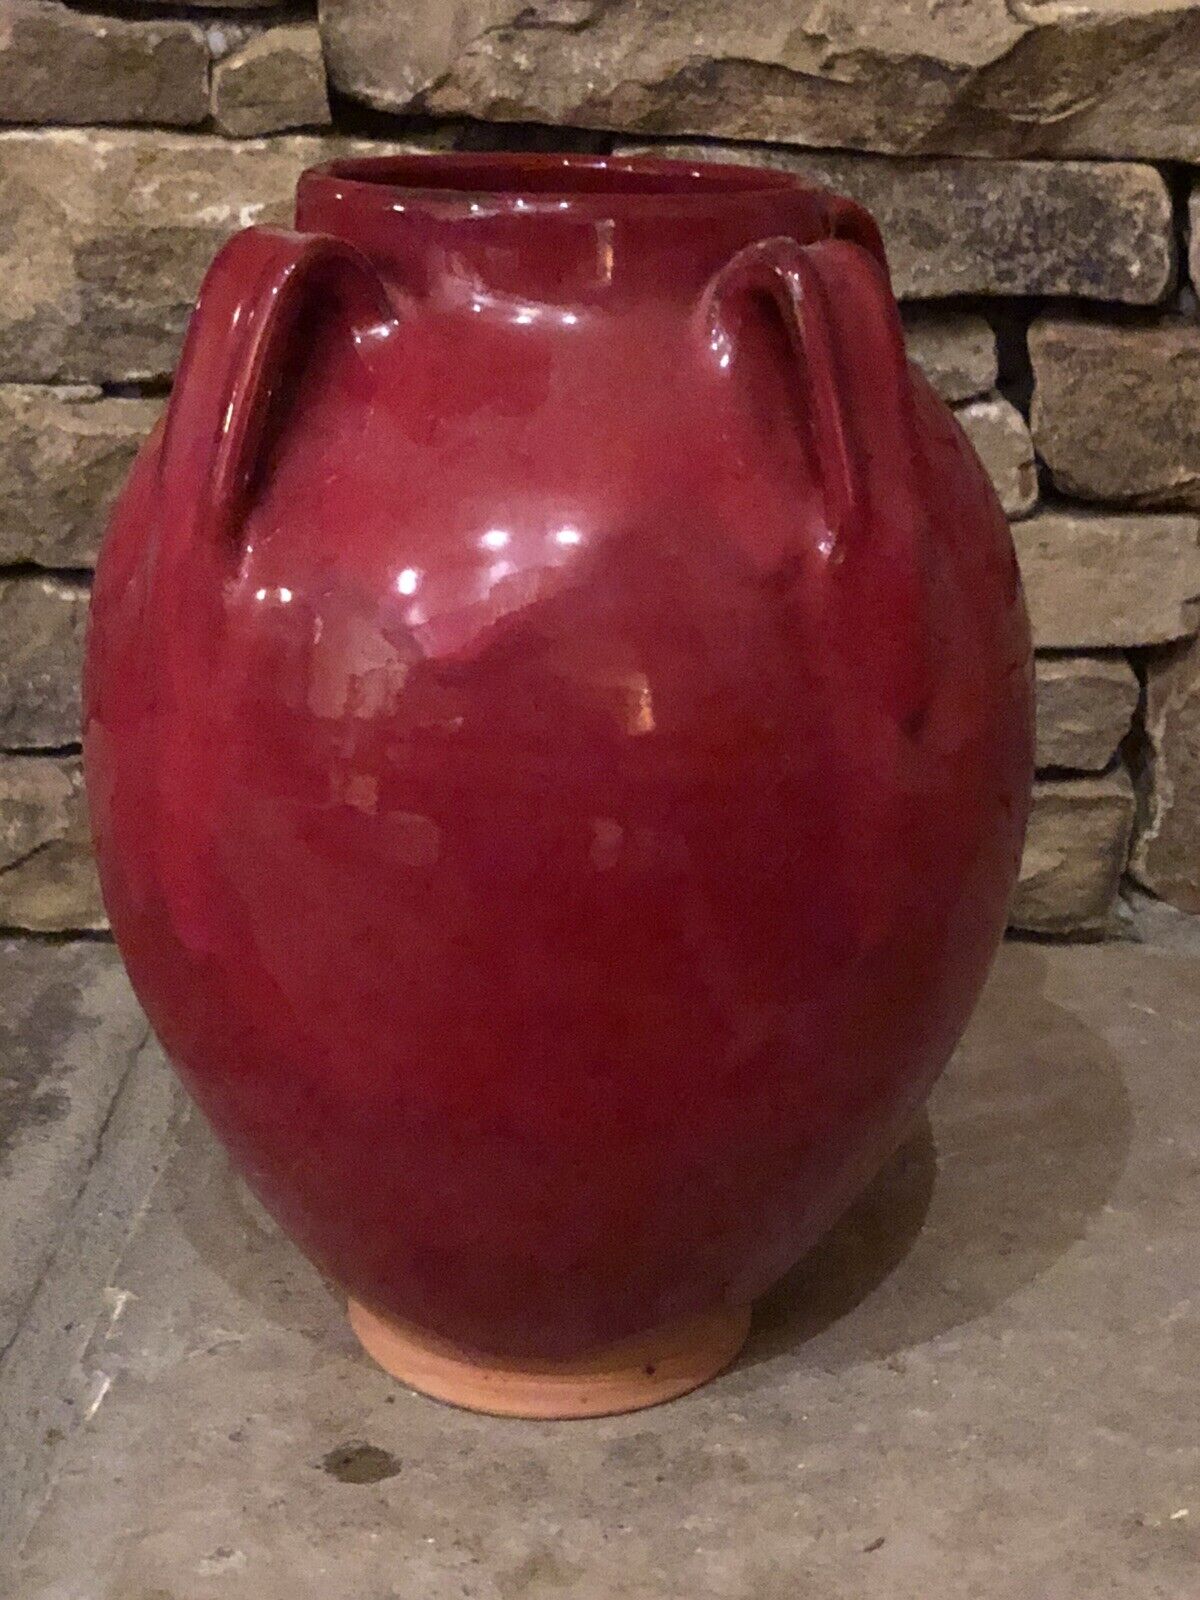 Ben Owen III Chinese Red Lily Vase  NC pottery 4 strap handles 1996 Seagrove NC